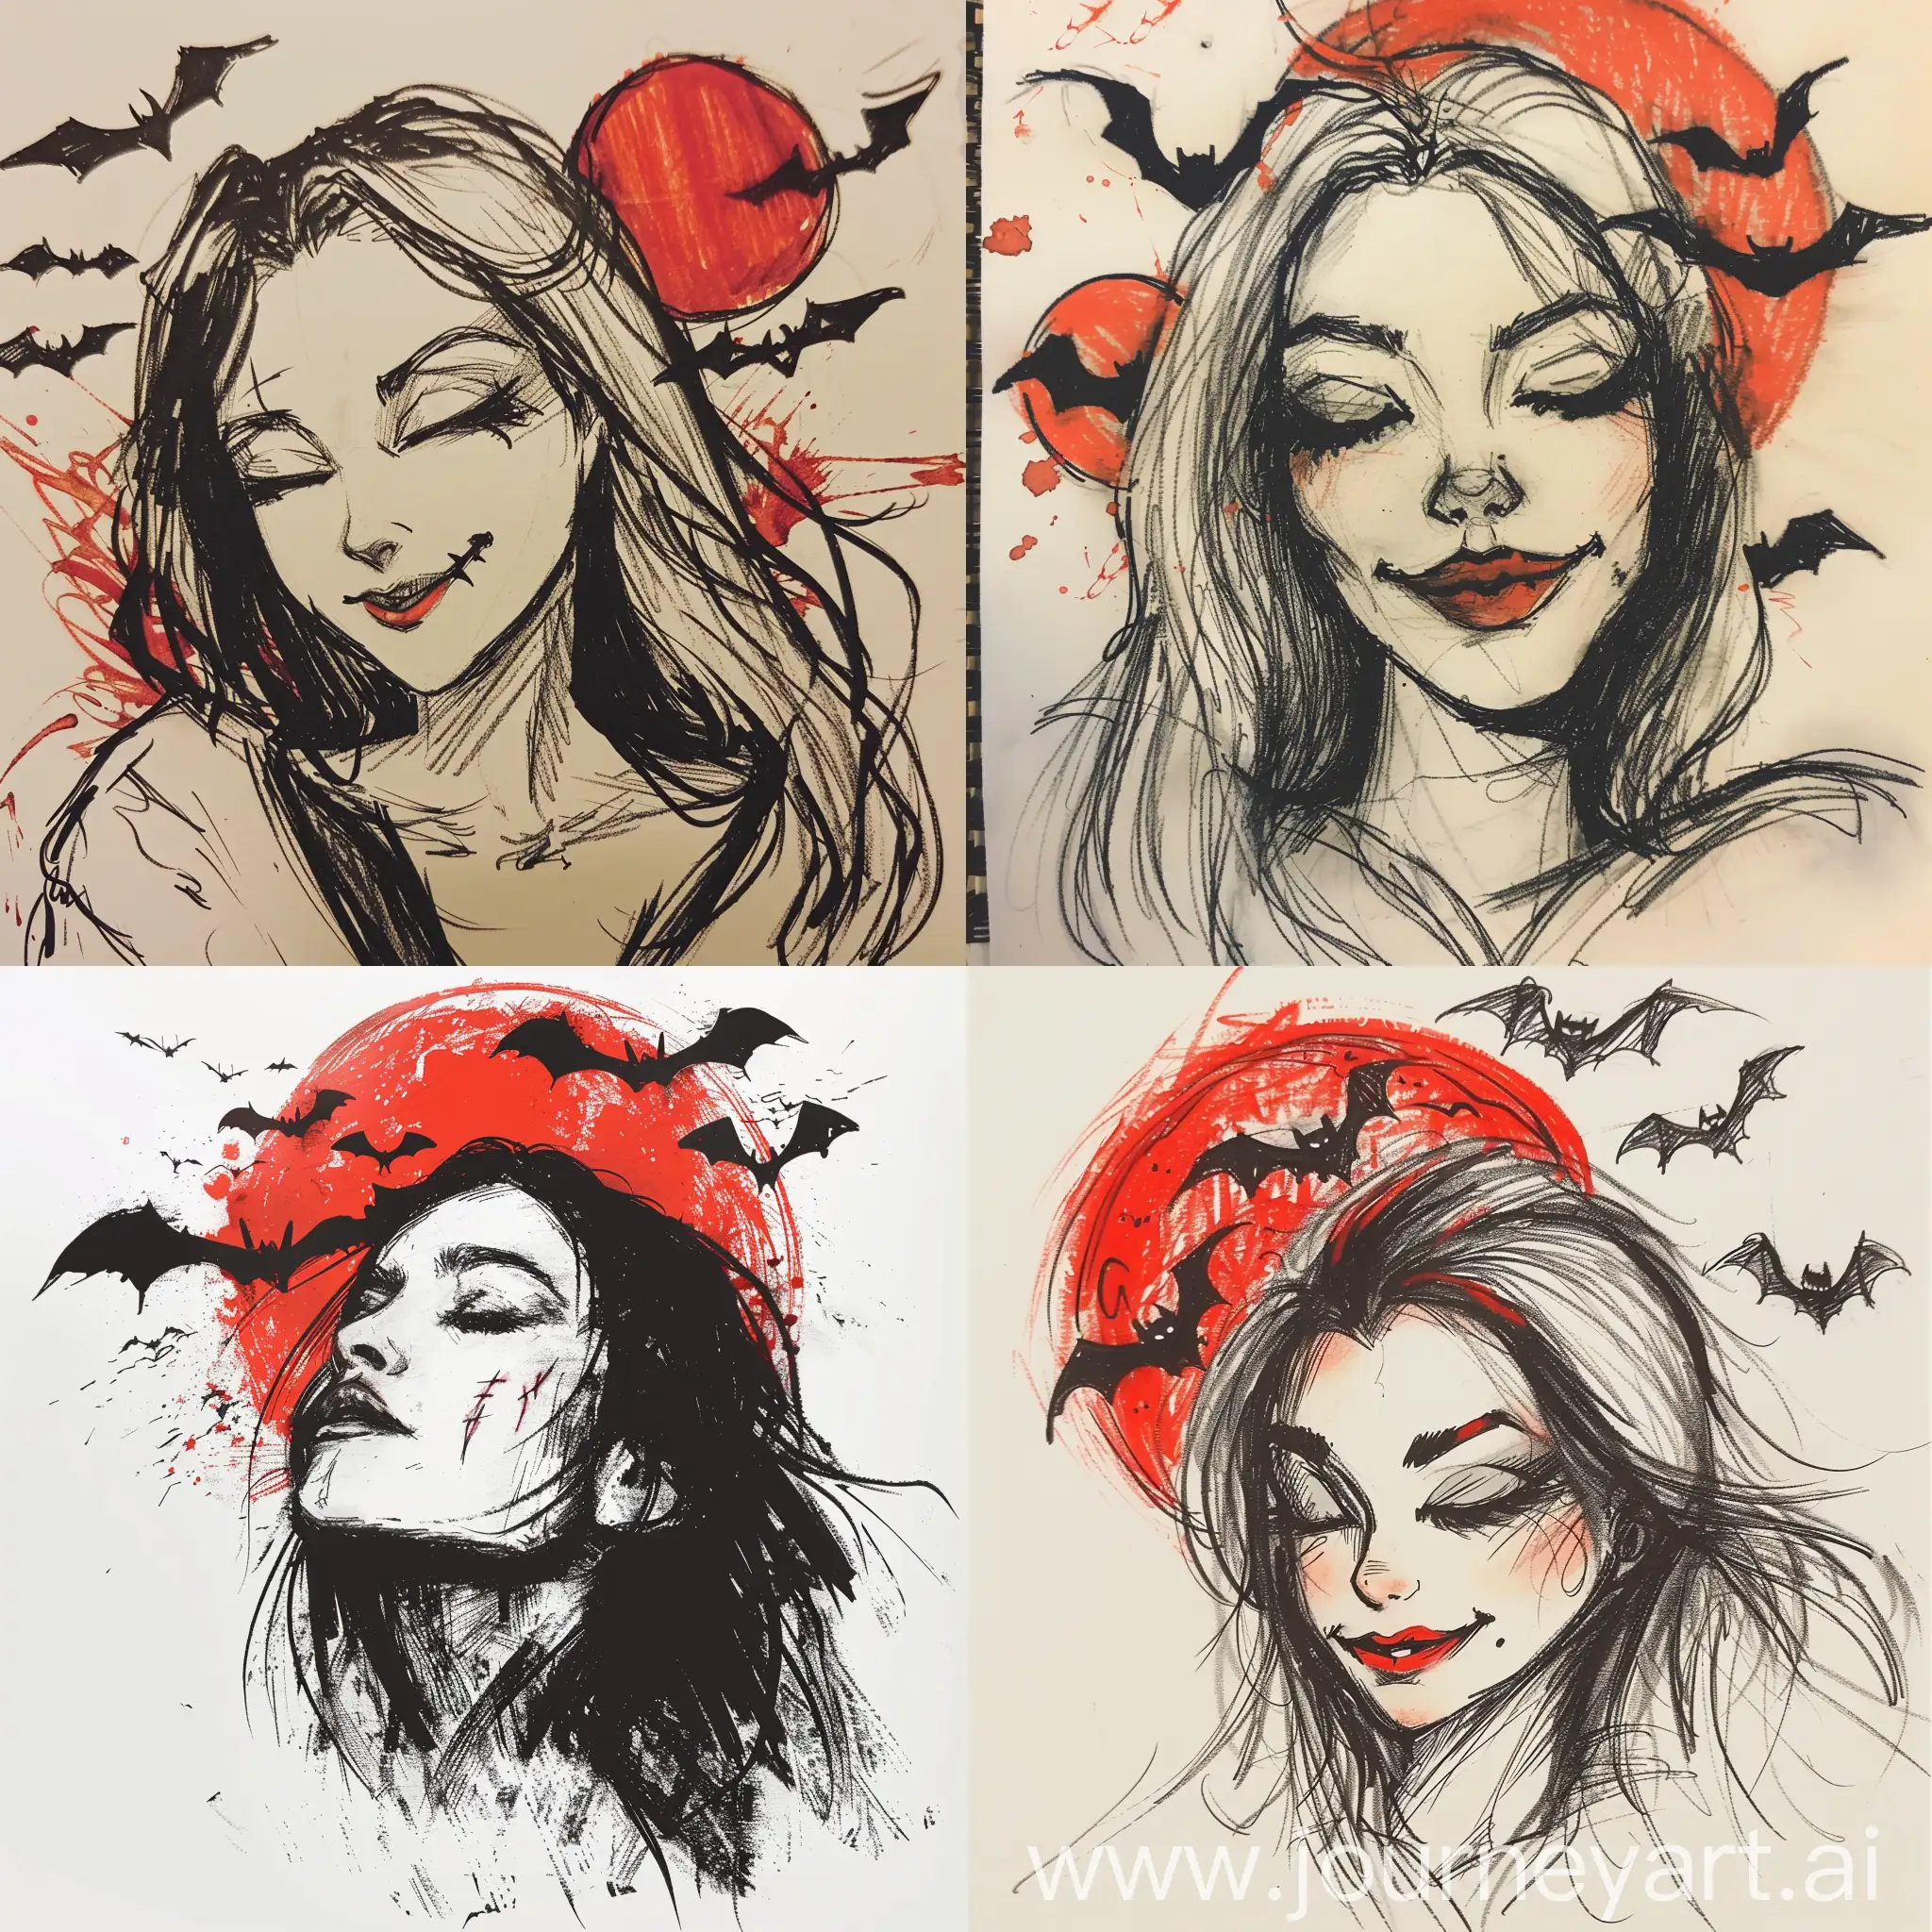 Sultry-Vampire-Lady-Winking-Under-the-Blood-Moon-with-Bats-in-Background